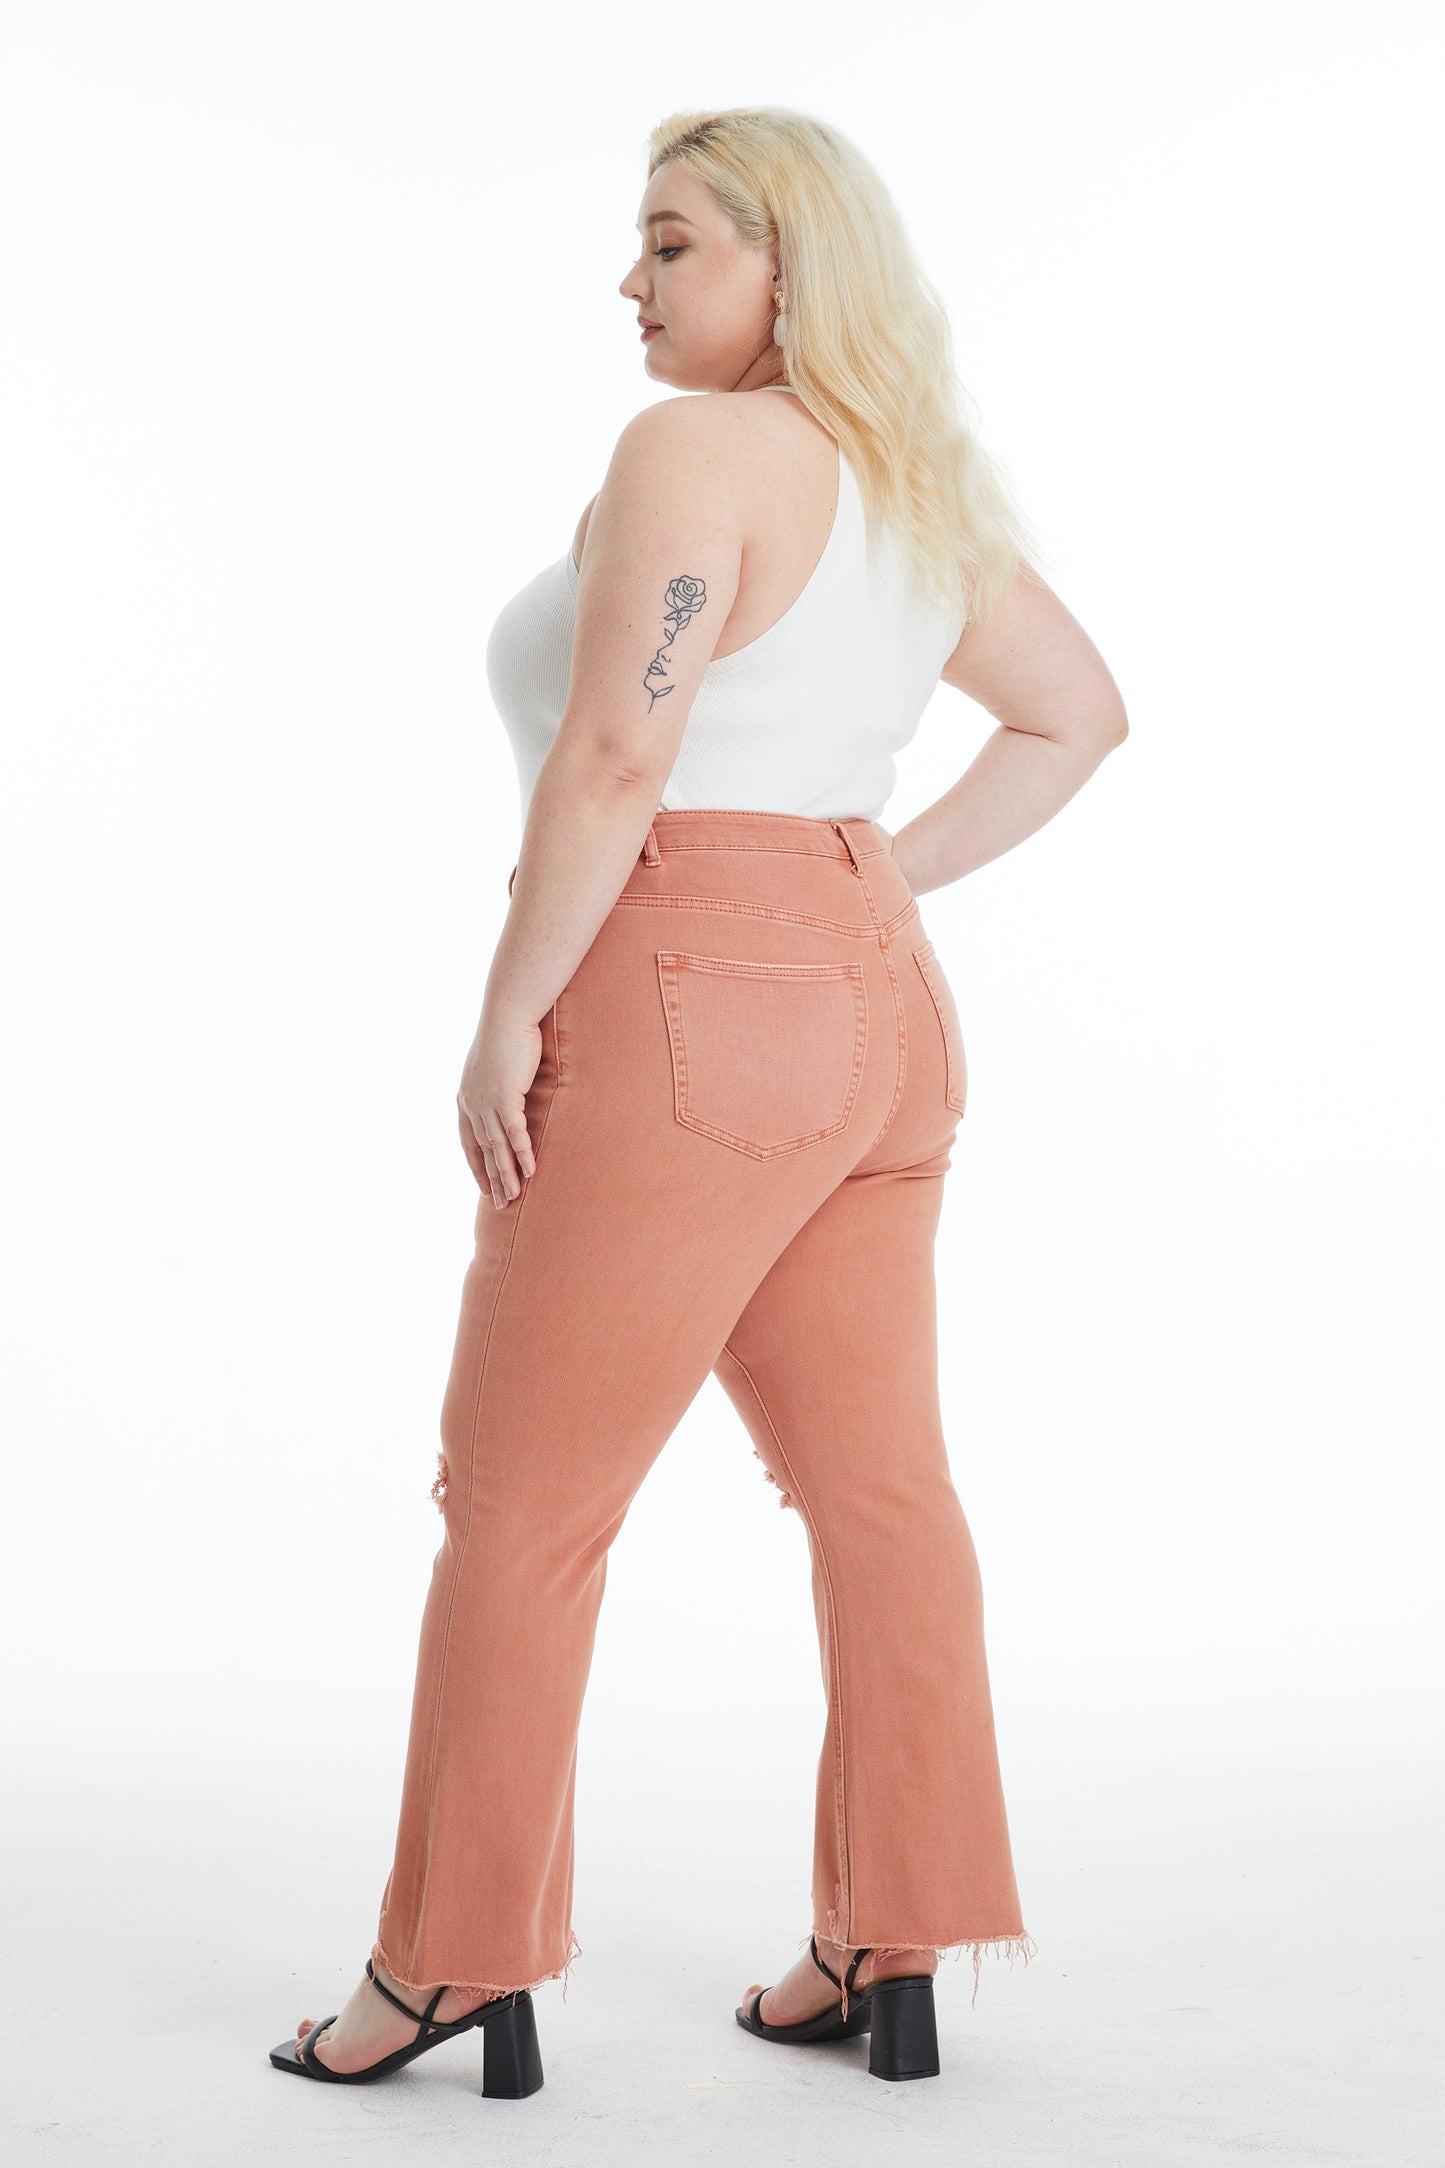 EMILY HIGH RISE DISTRESSED FLARE PANTS BYF1077-P SALMON PLUS SIZE